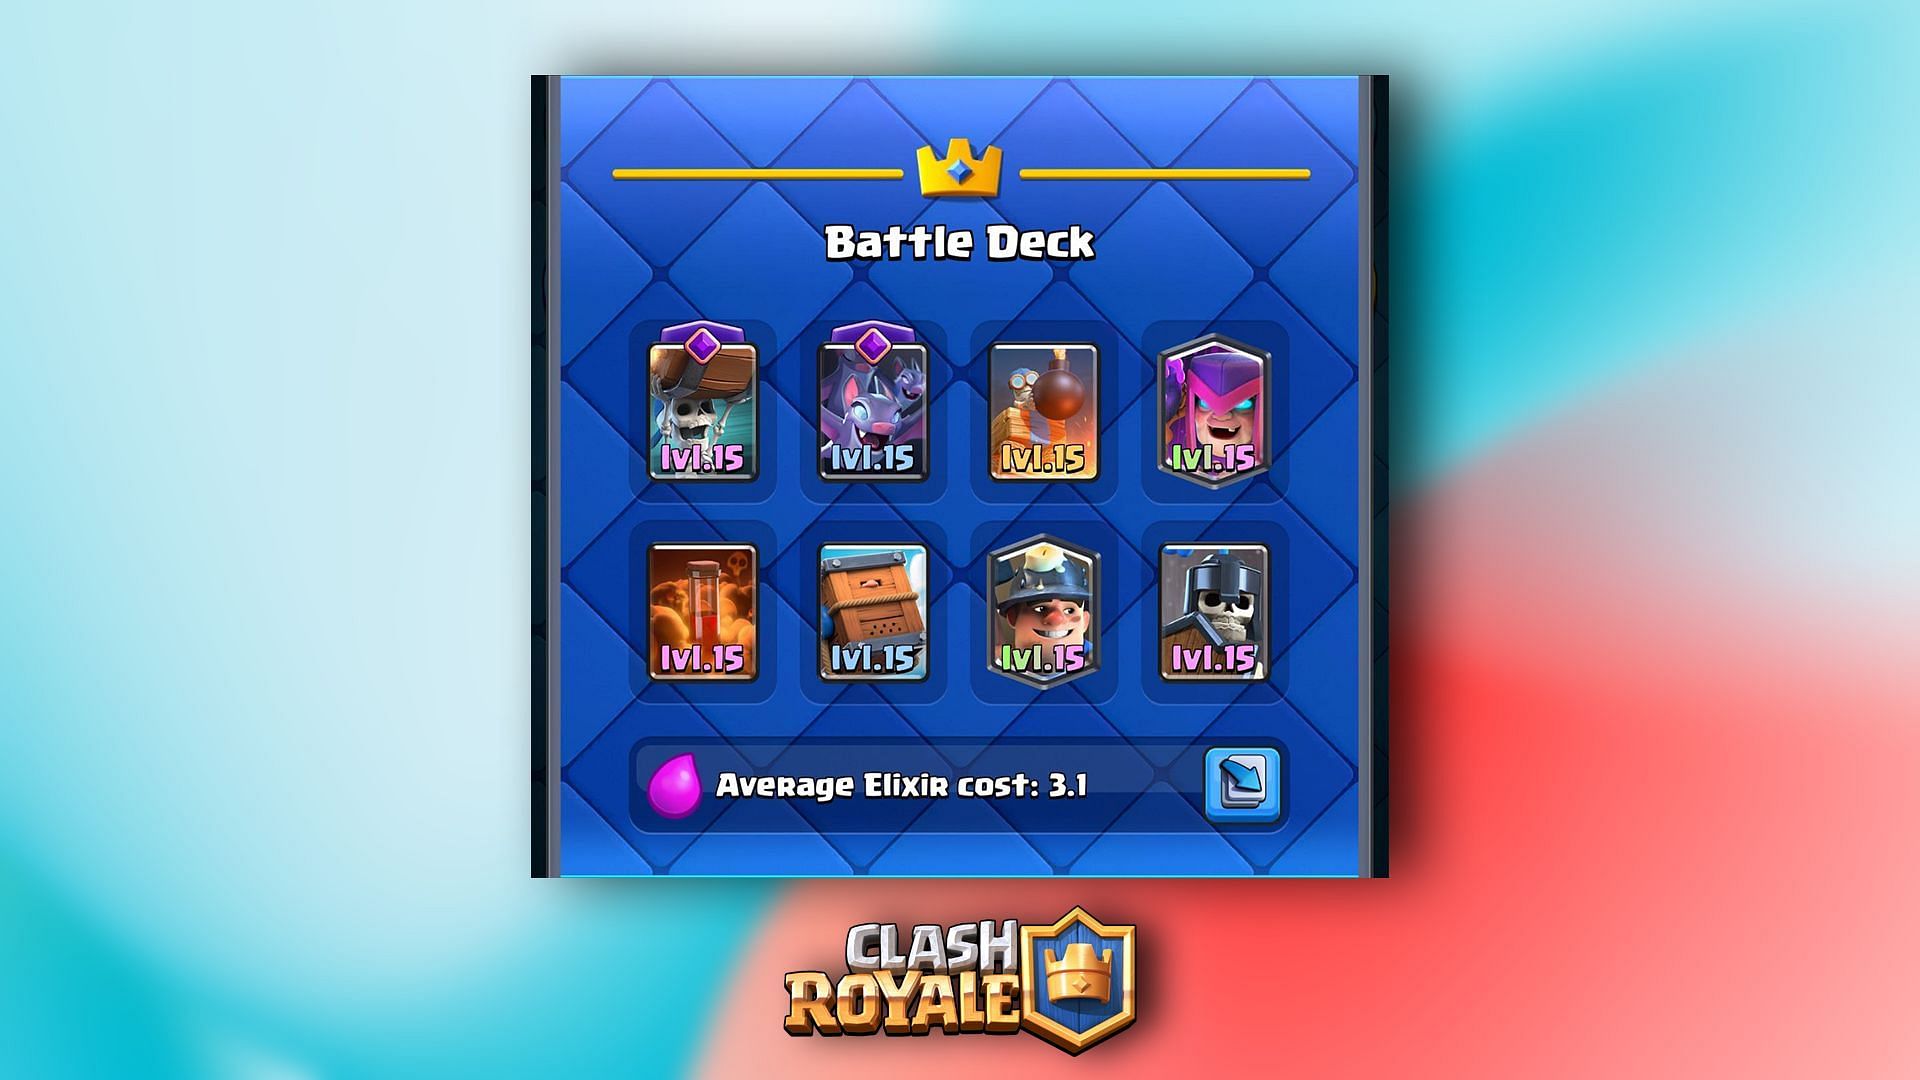 Miner Poison is among the best clash royale decks for Arena 15 (Image via Supercell)